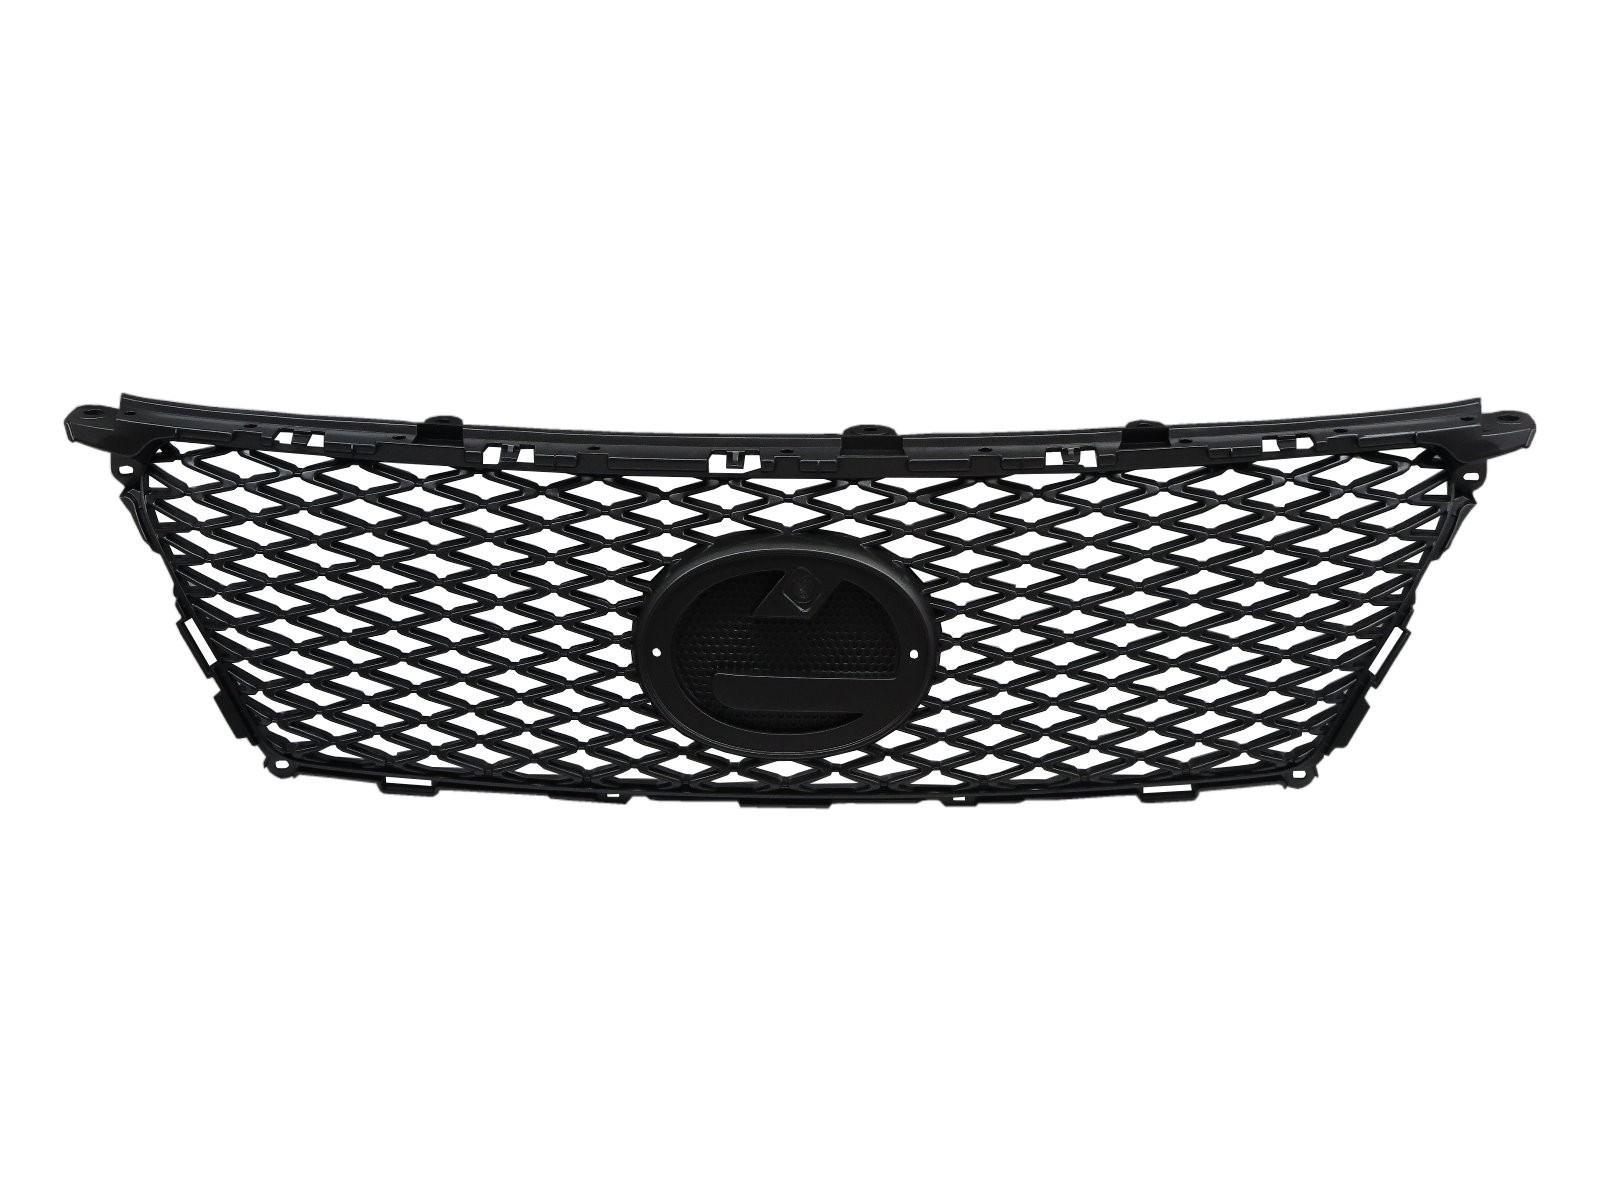 CrazyTheGod IS IS250/IS350/IS220D XE20 Second generation 2011-2015 FACELIFT Sedan 4D ISF Style GRILLE/GRILL Matt Black for LEXUS